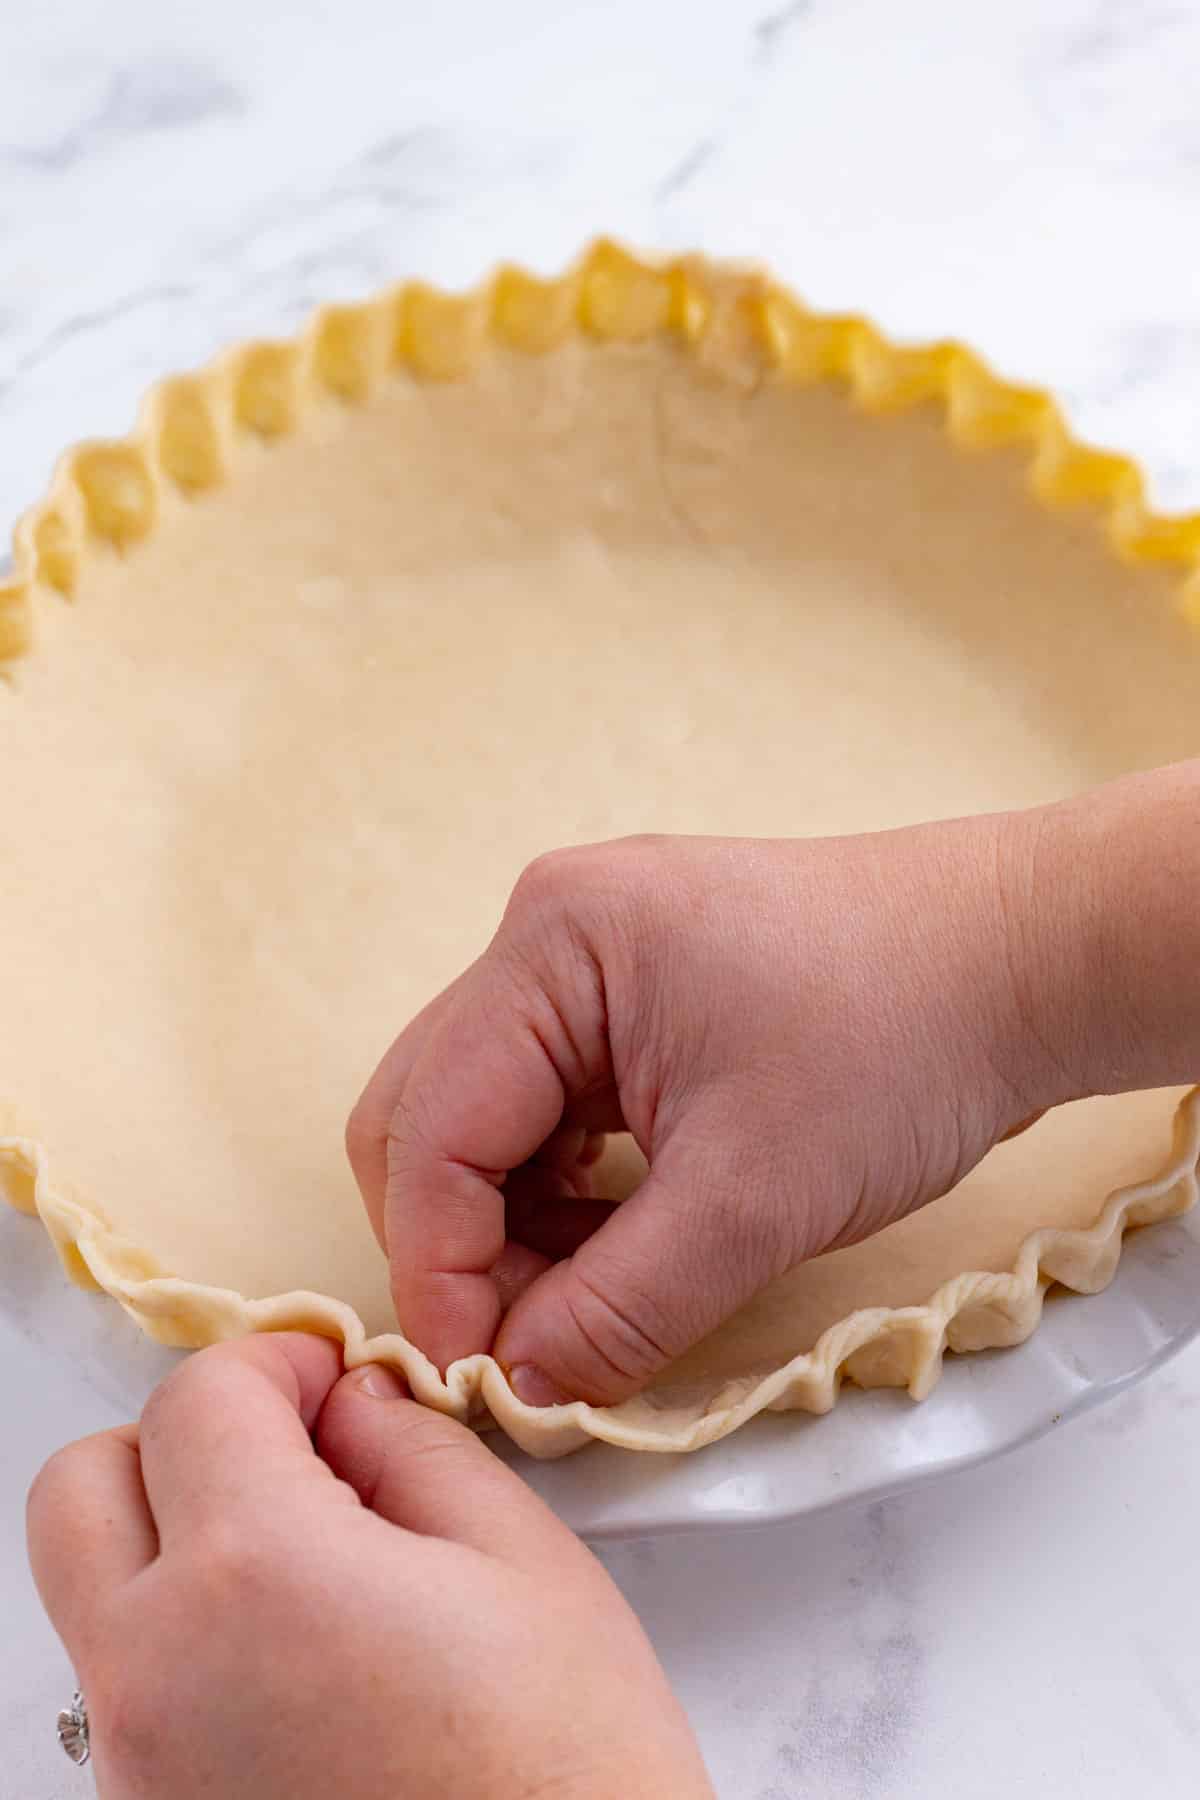 A hand crimps the edge of a pie crust.